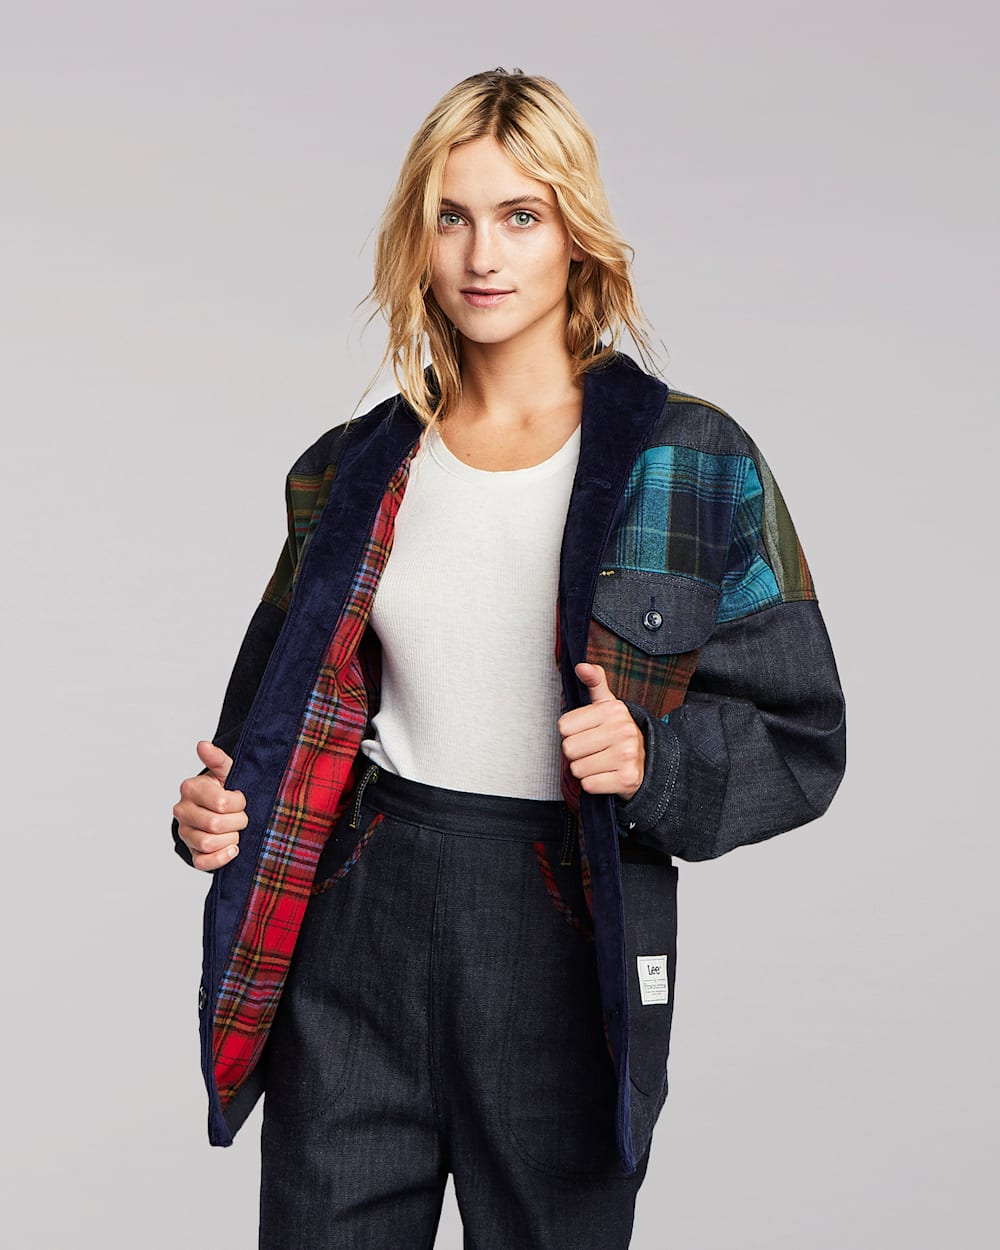 ALTERNATE VIEW OF LEE X PENDLETON PATCHWORK CHORE JACKET IN PATCHWORK image number 3